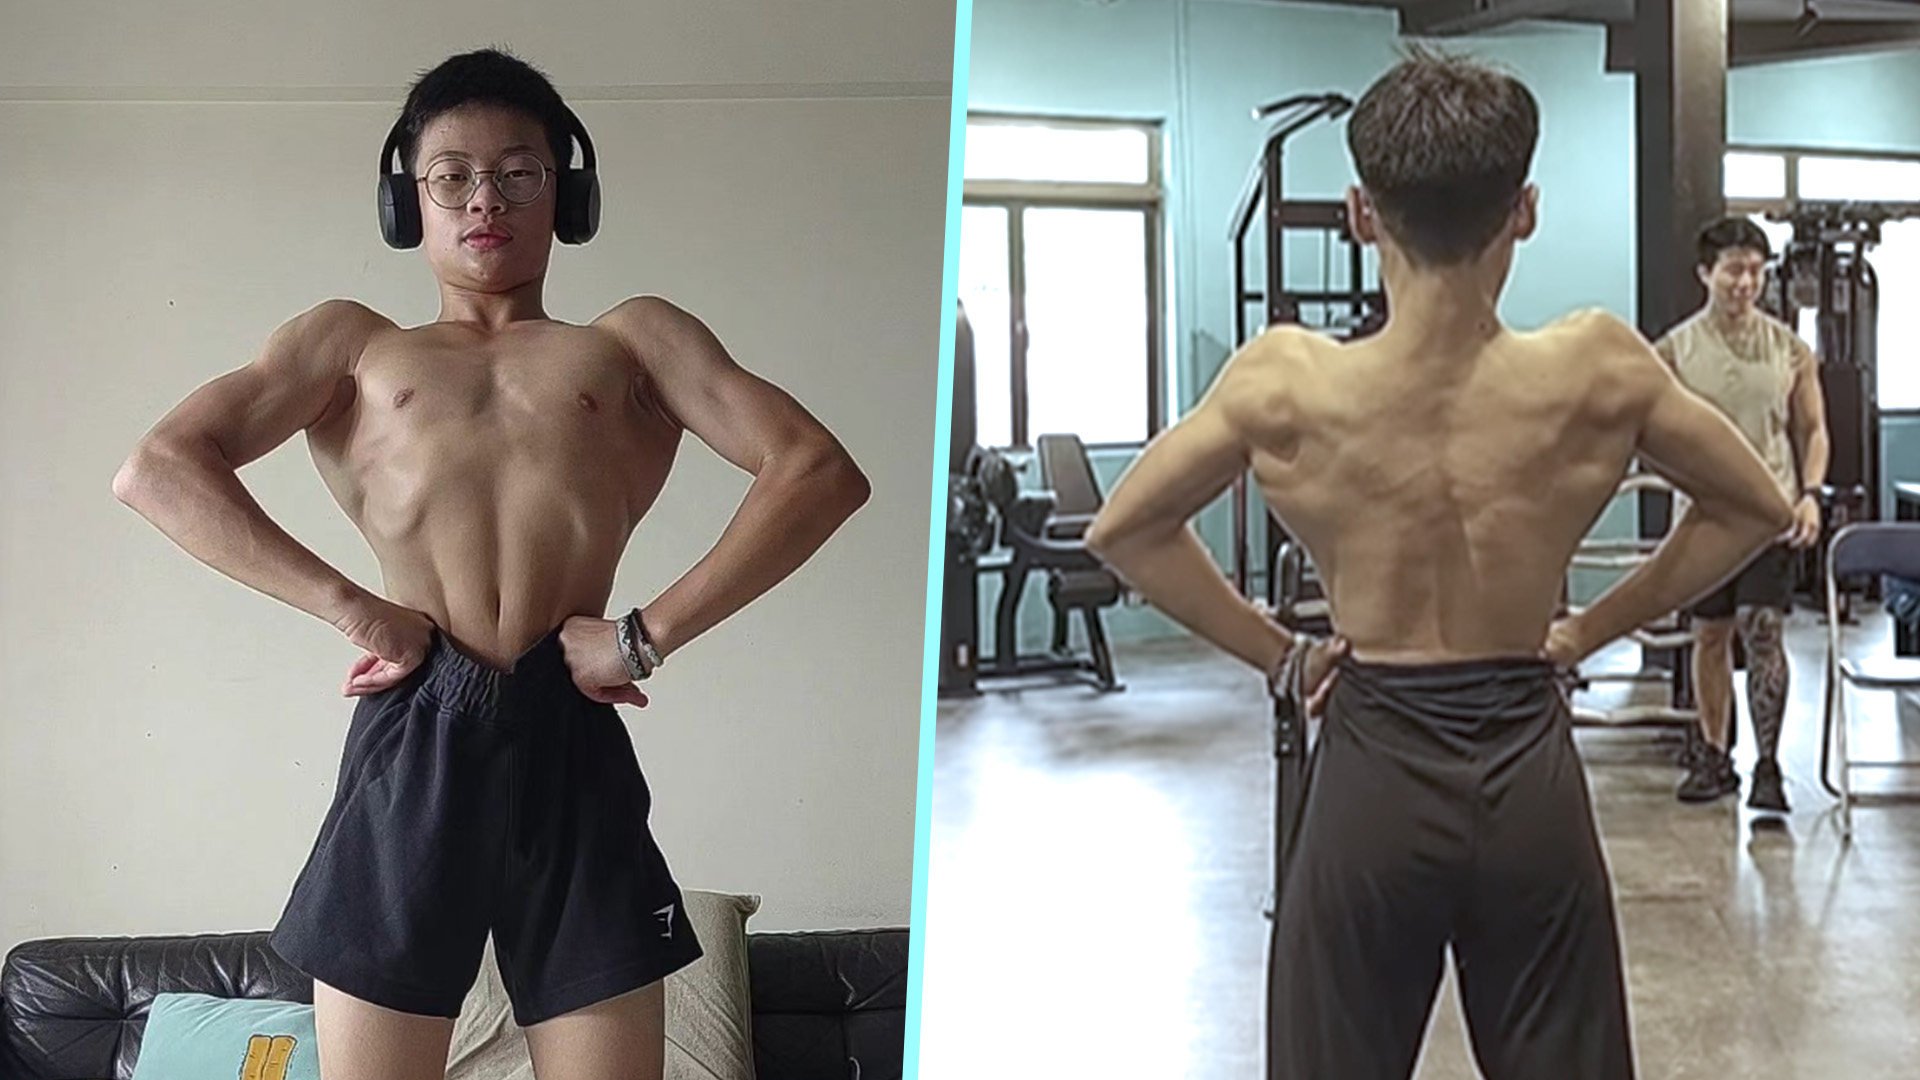 A 14-year-old dyslexic boy in Singapore has impressed social media with his impressive workout regime, and his physique. Photo: SCMP composite/Instagram